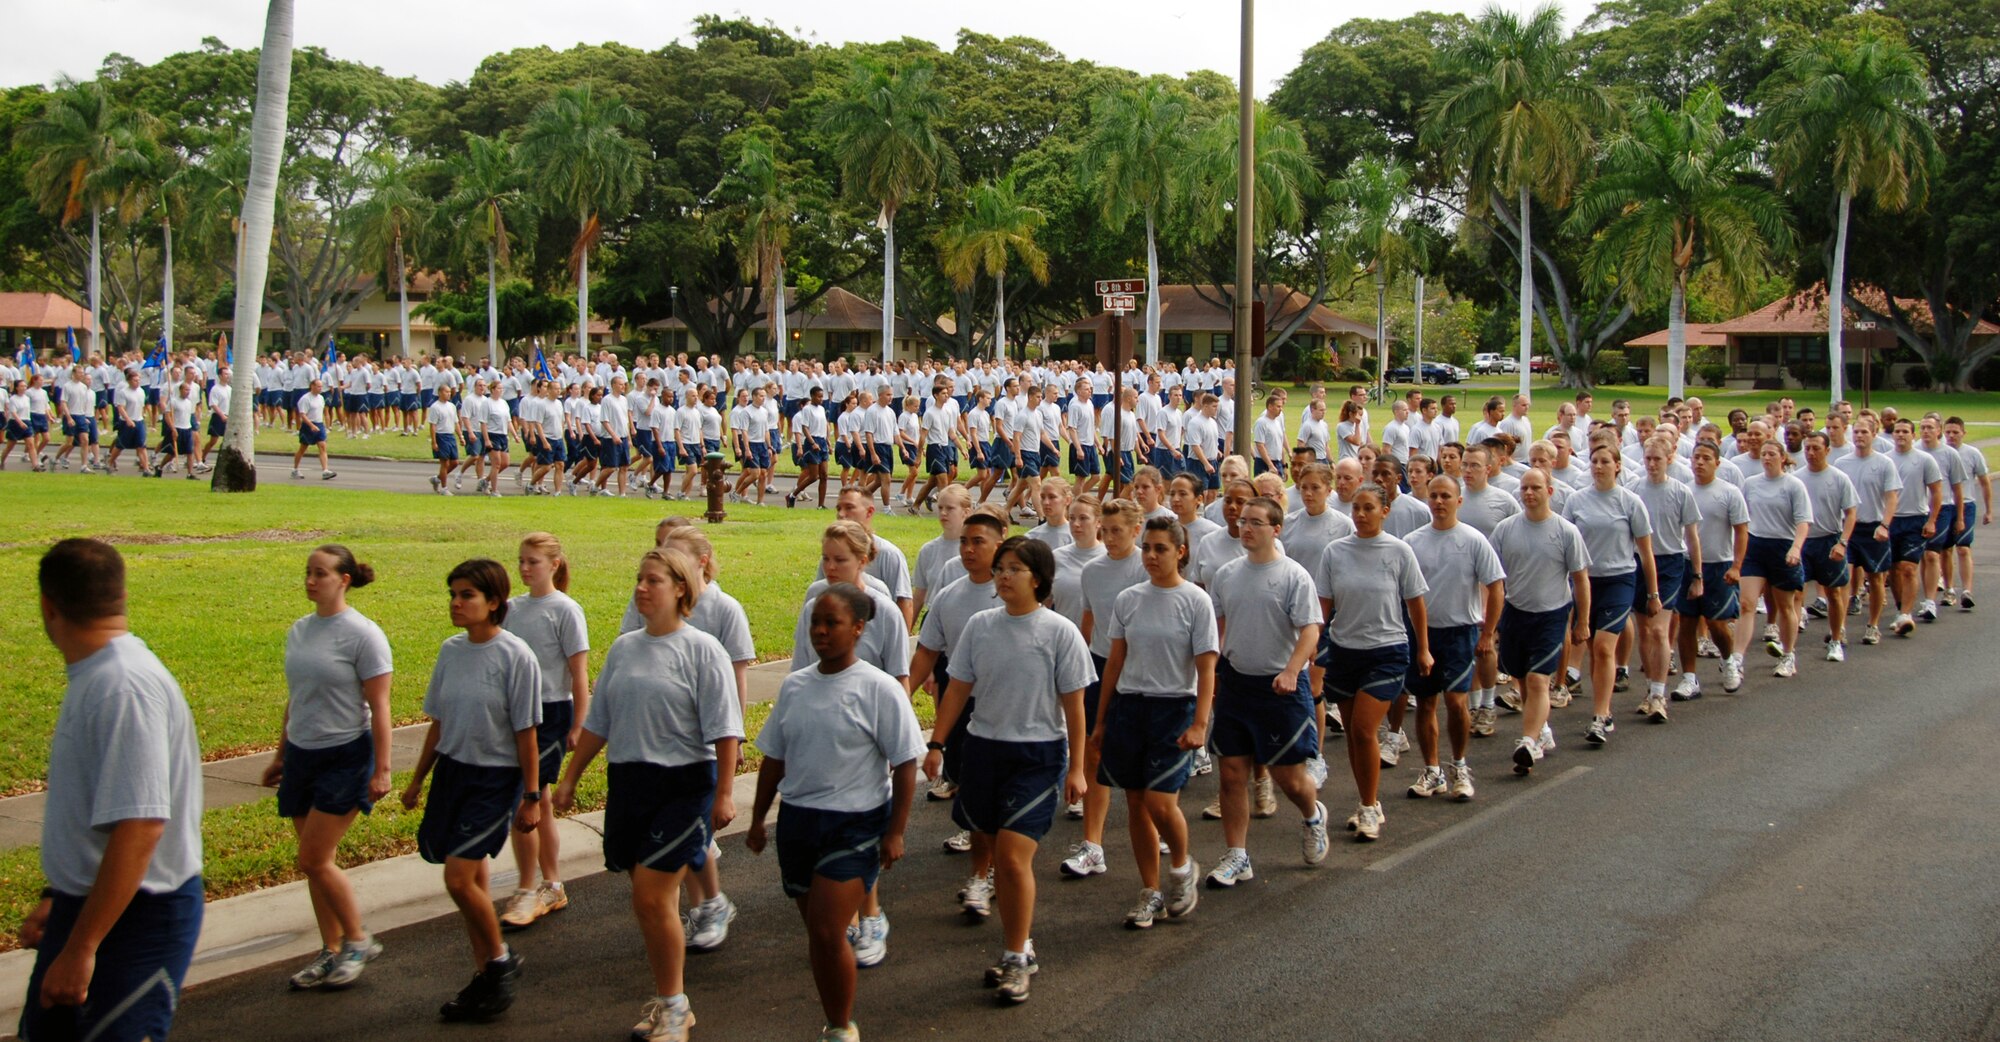 Airmen march in formation before marching "double time" at the "Warrior Run" May 7 at Joint Base Pearl Harbor Hickam, Hi. Participants were addressed by Col. Giovanni Tuck, 15th Airlift Wing Commander before beginning the run - Col. Tuck's last as 15th AW commander. (U.S. Air Force photo by Senior Airman Nathan Allen)